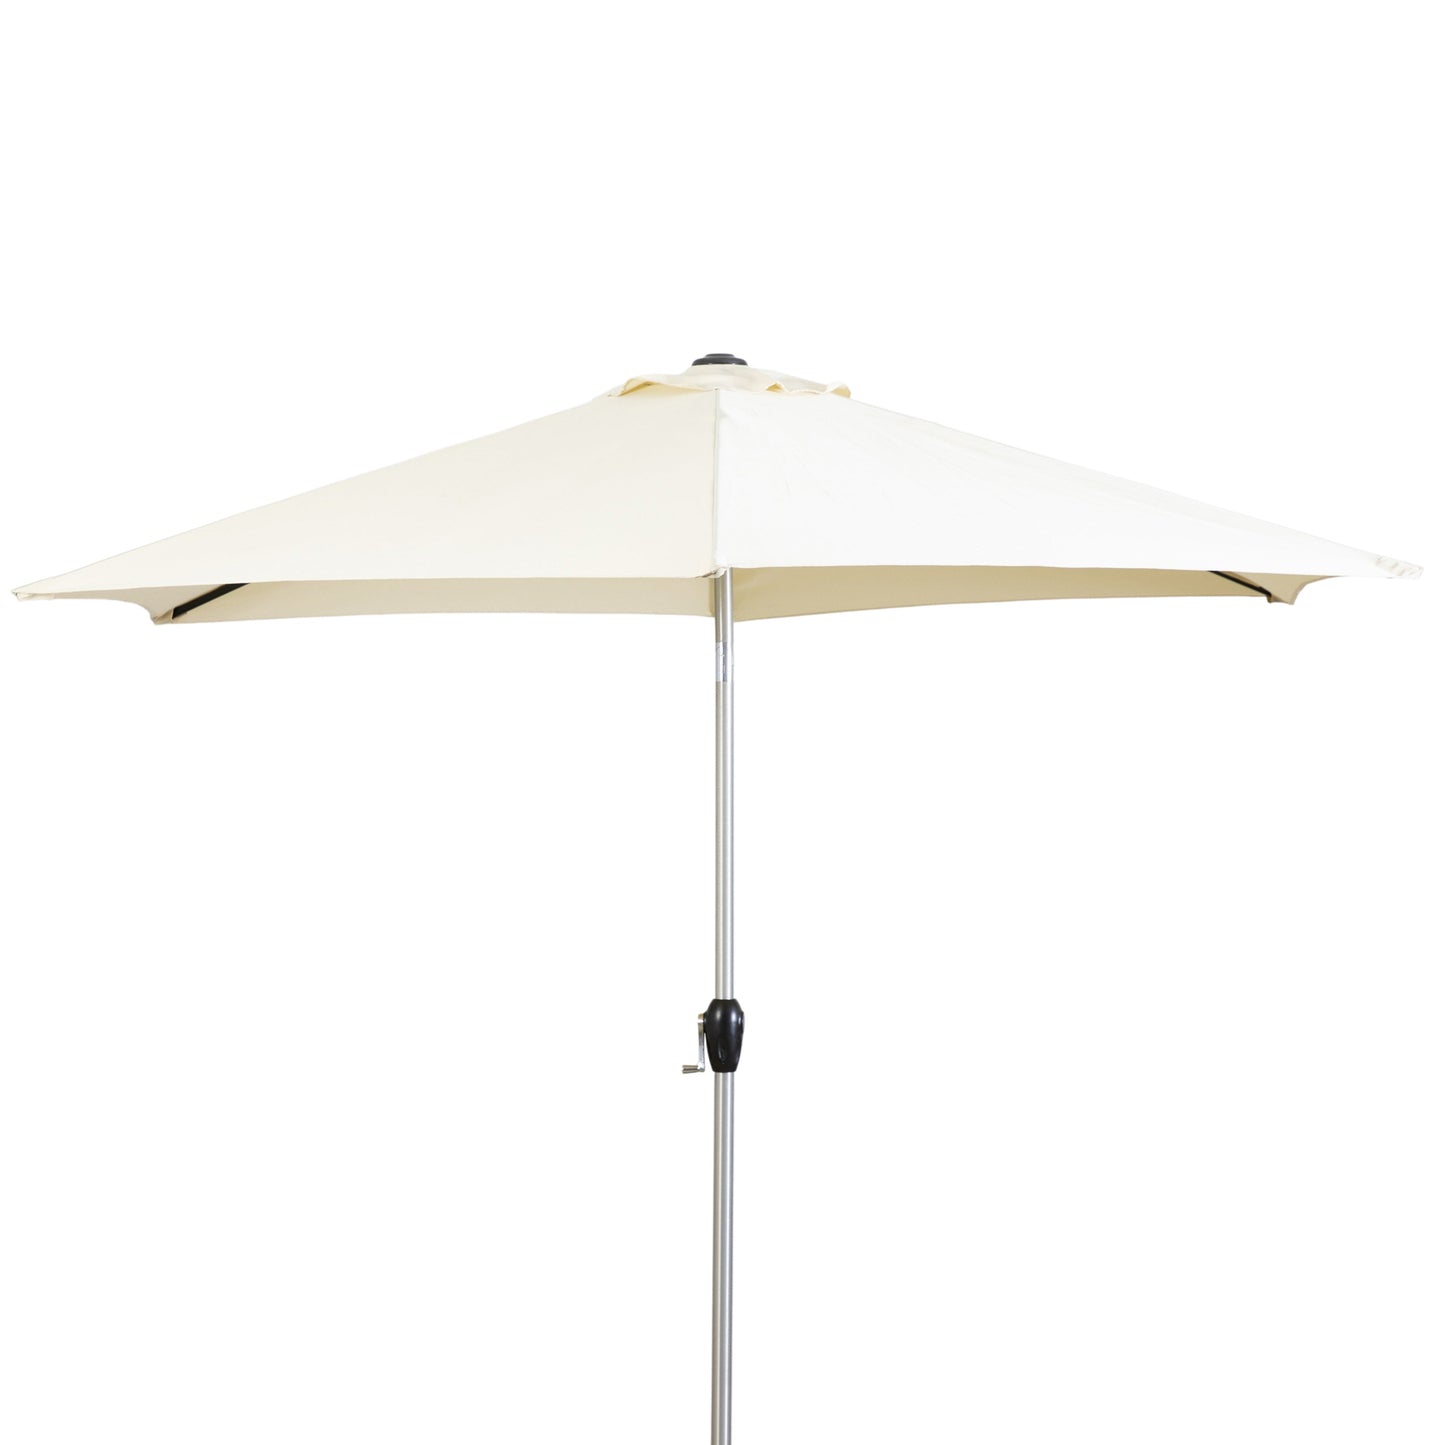 An Alwington 2.7m Parasol Cream by Kikiathome.co.uk adds flair to interior decor and home furniture on a white background.